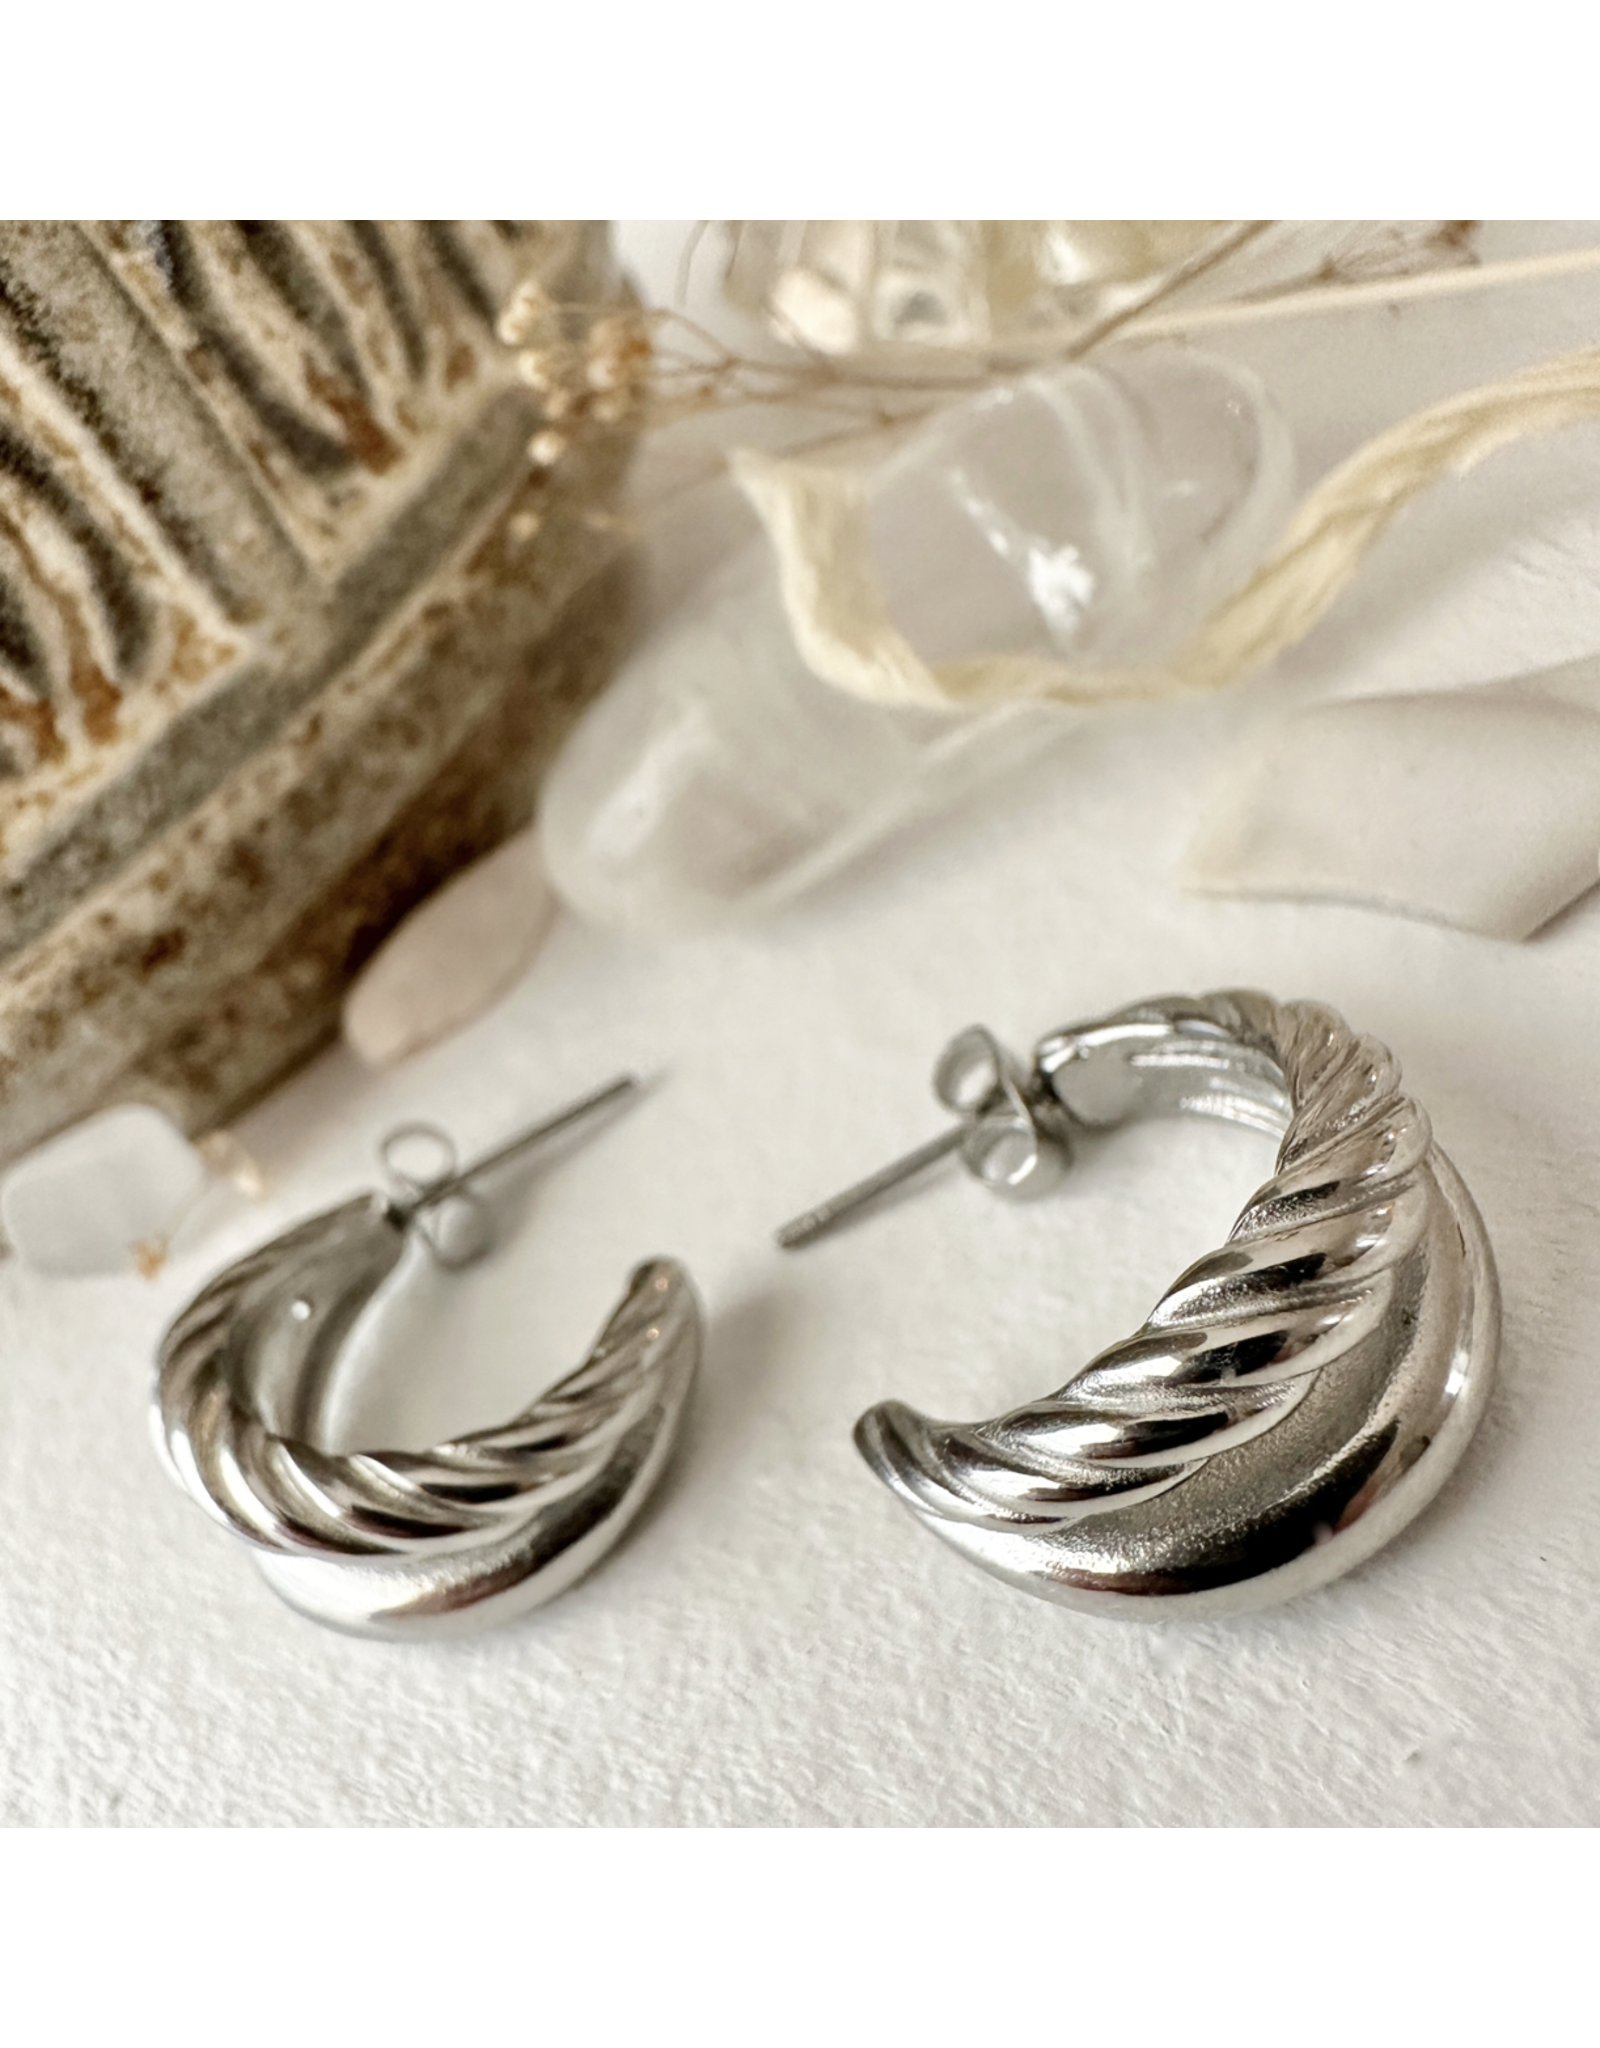 Pika & Bear Pika & Bear- Mithra Double Layer Twisted Hoop Earrings - Sterling Silver